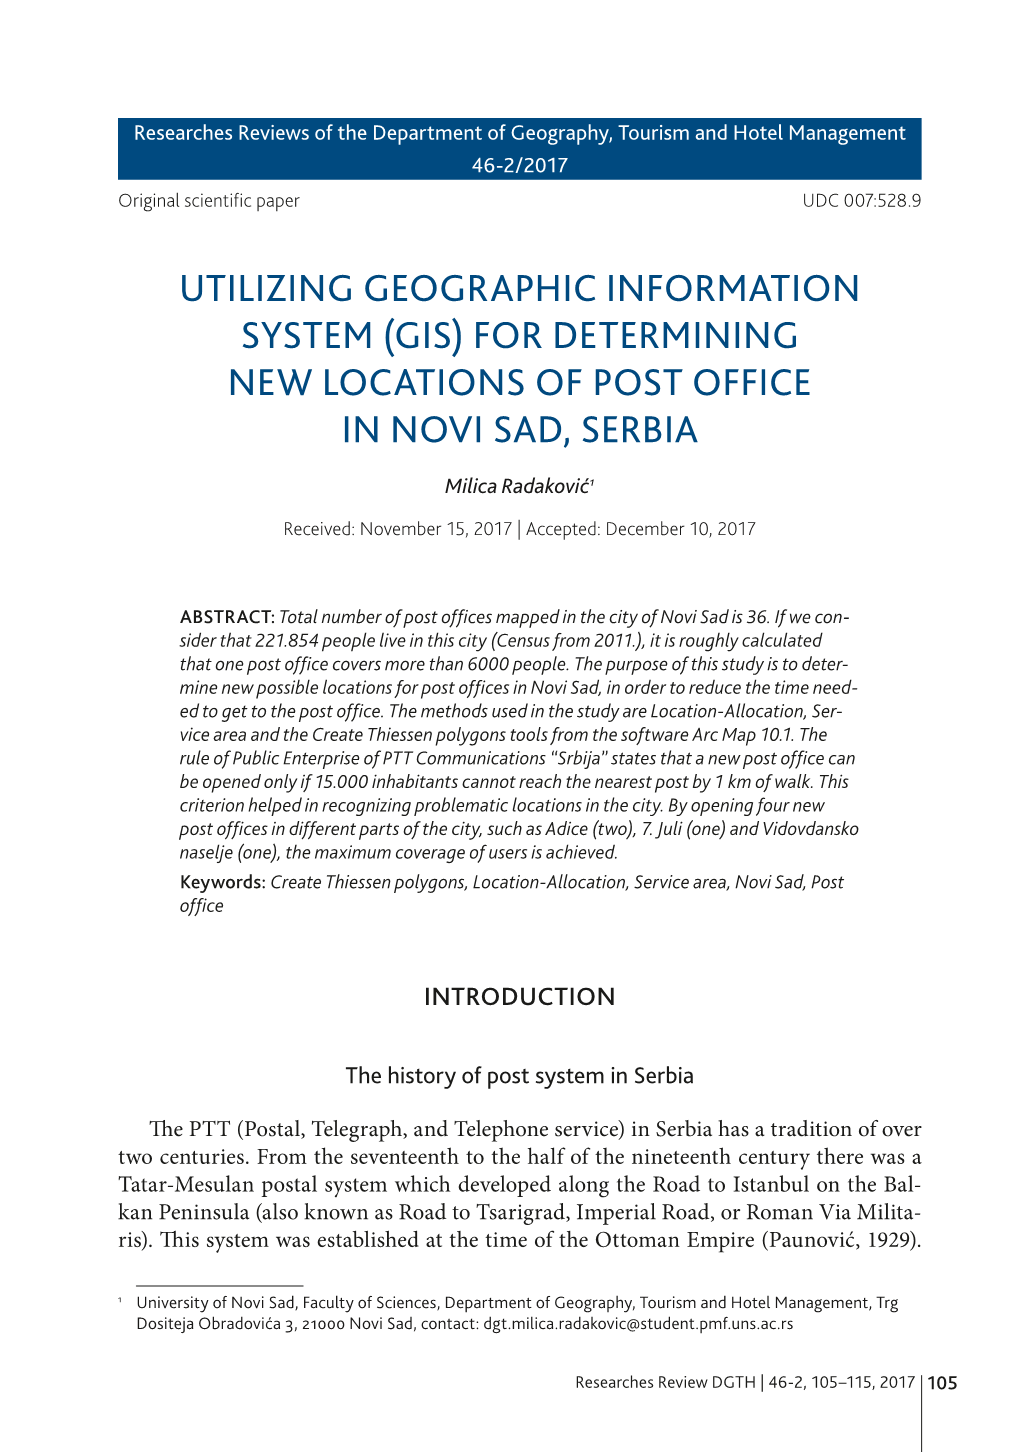 Utilizing Geographic Information System (Gis) for Determining New Locations of Post Office in Novi Sad, Serbia